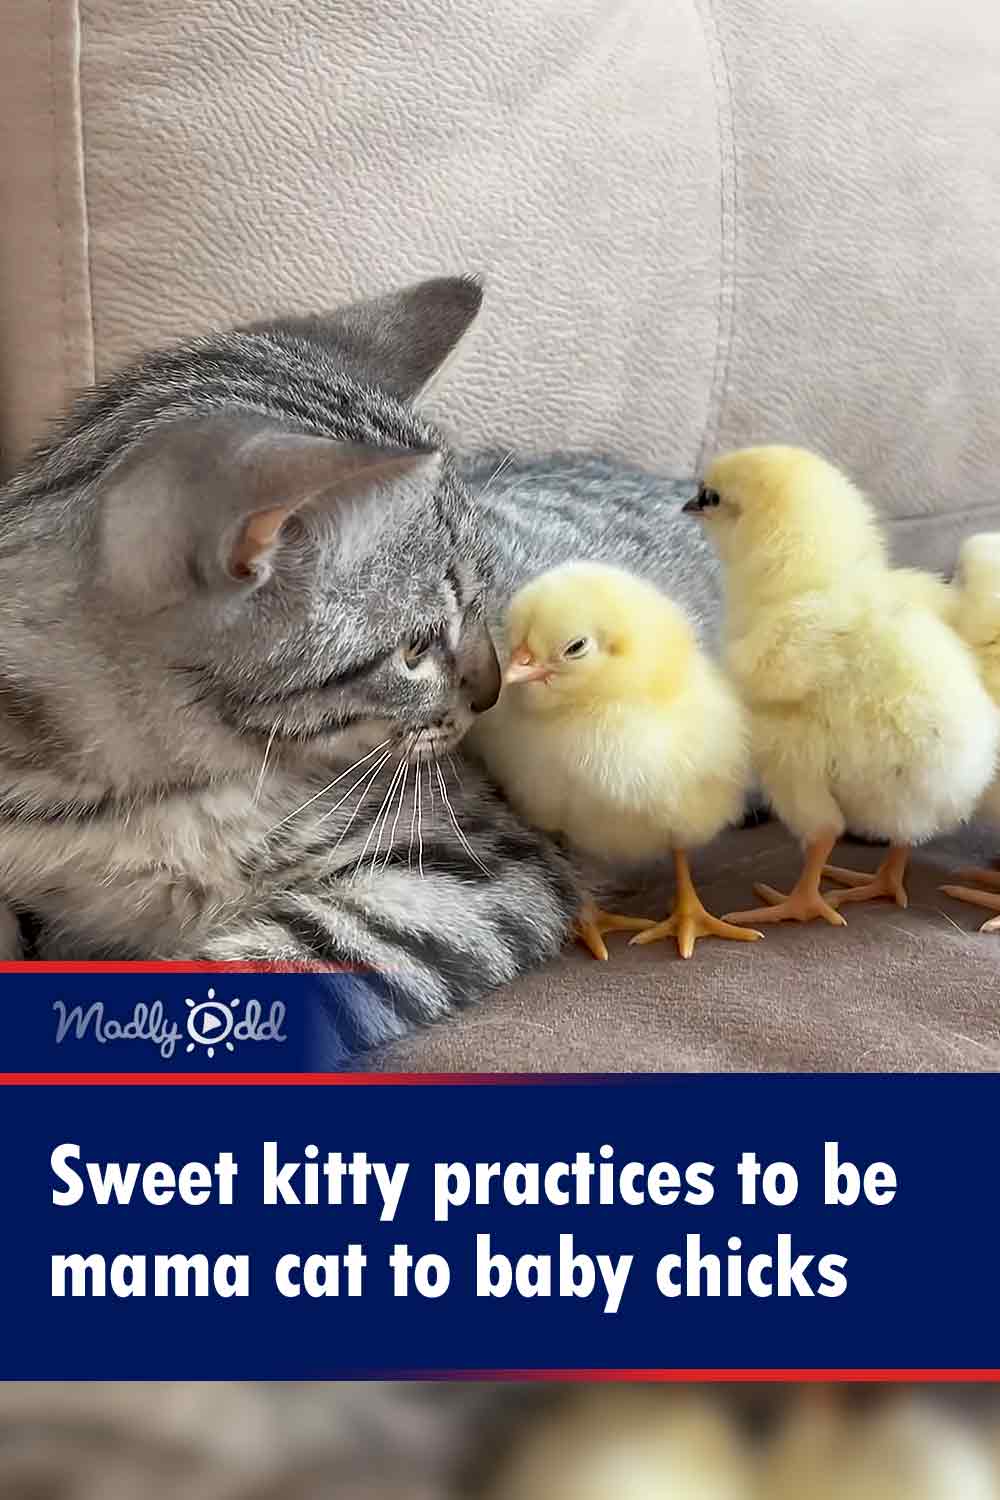 Sweet kitty practices to be mama cat to baby chicks